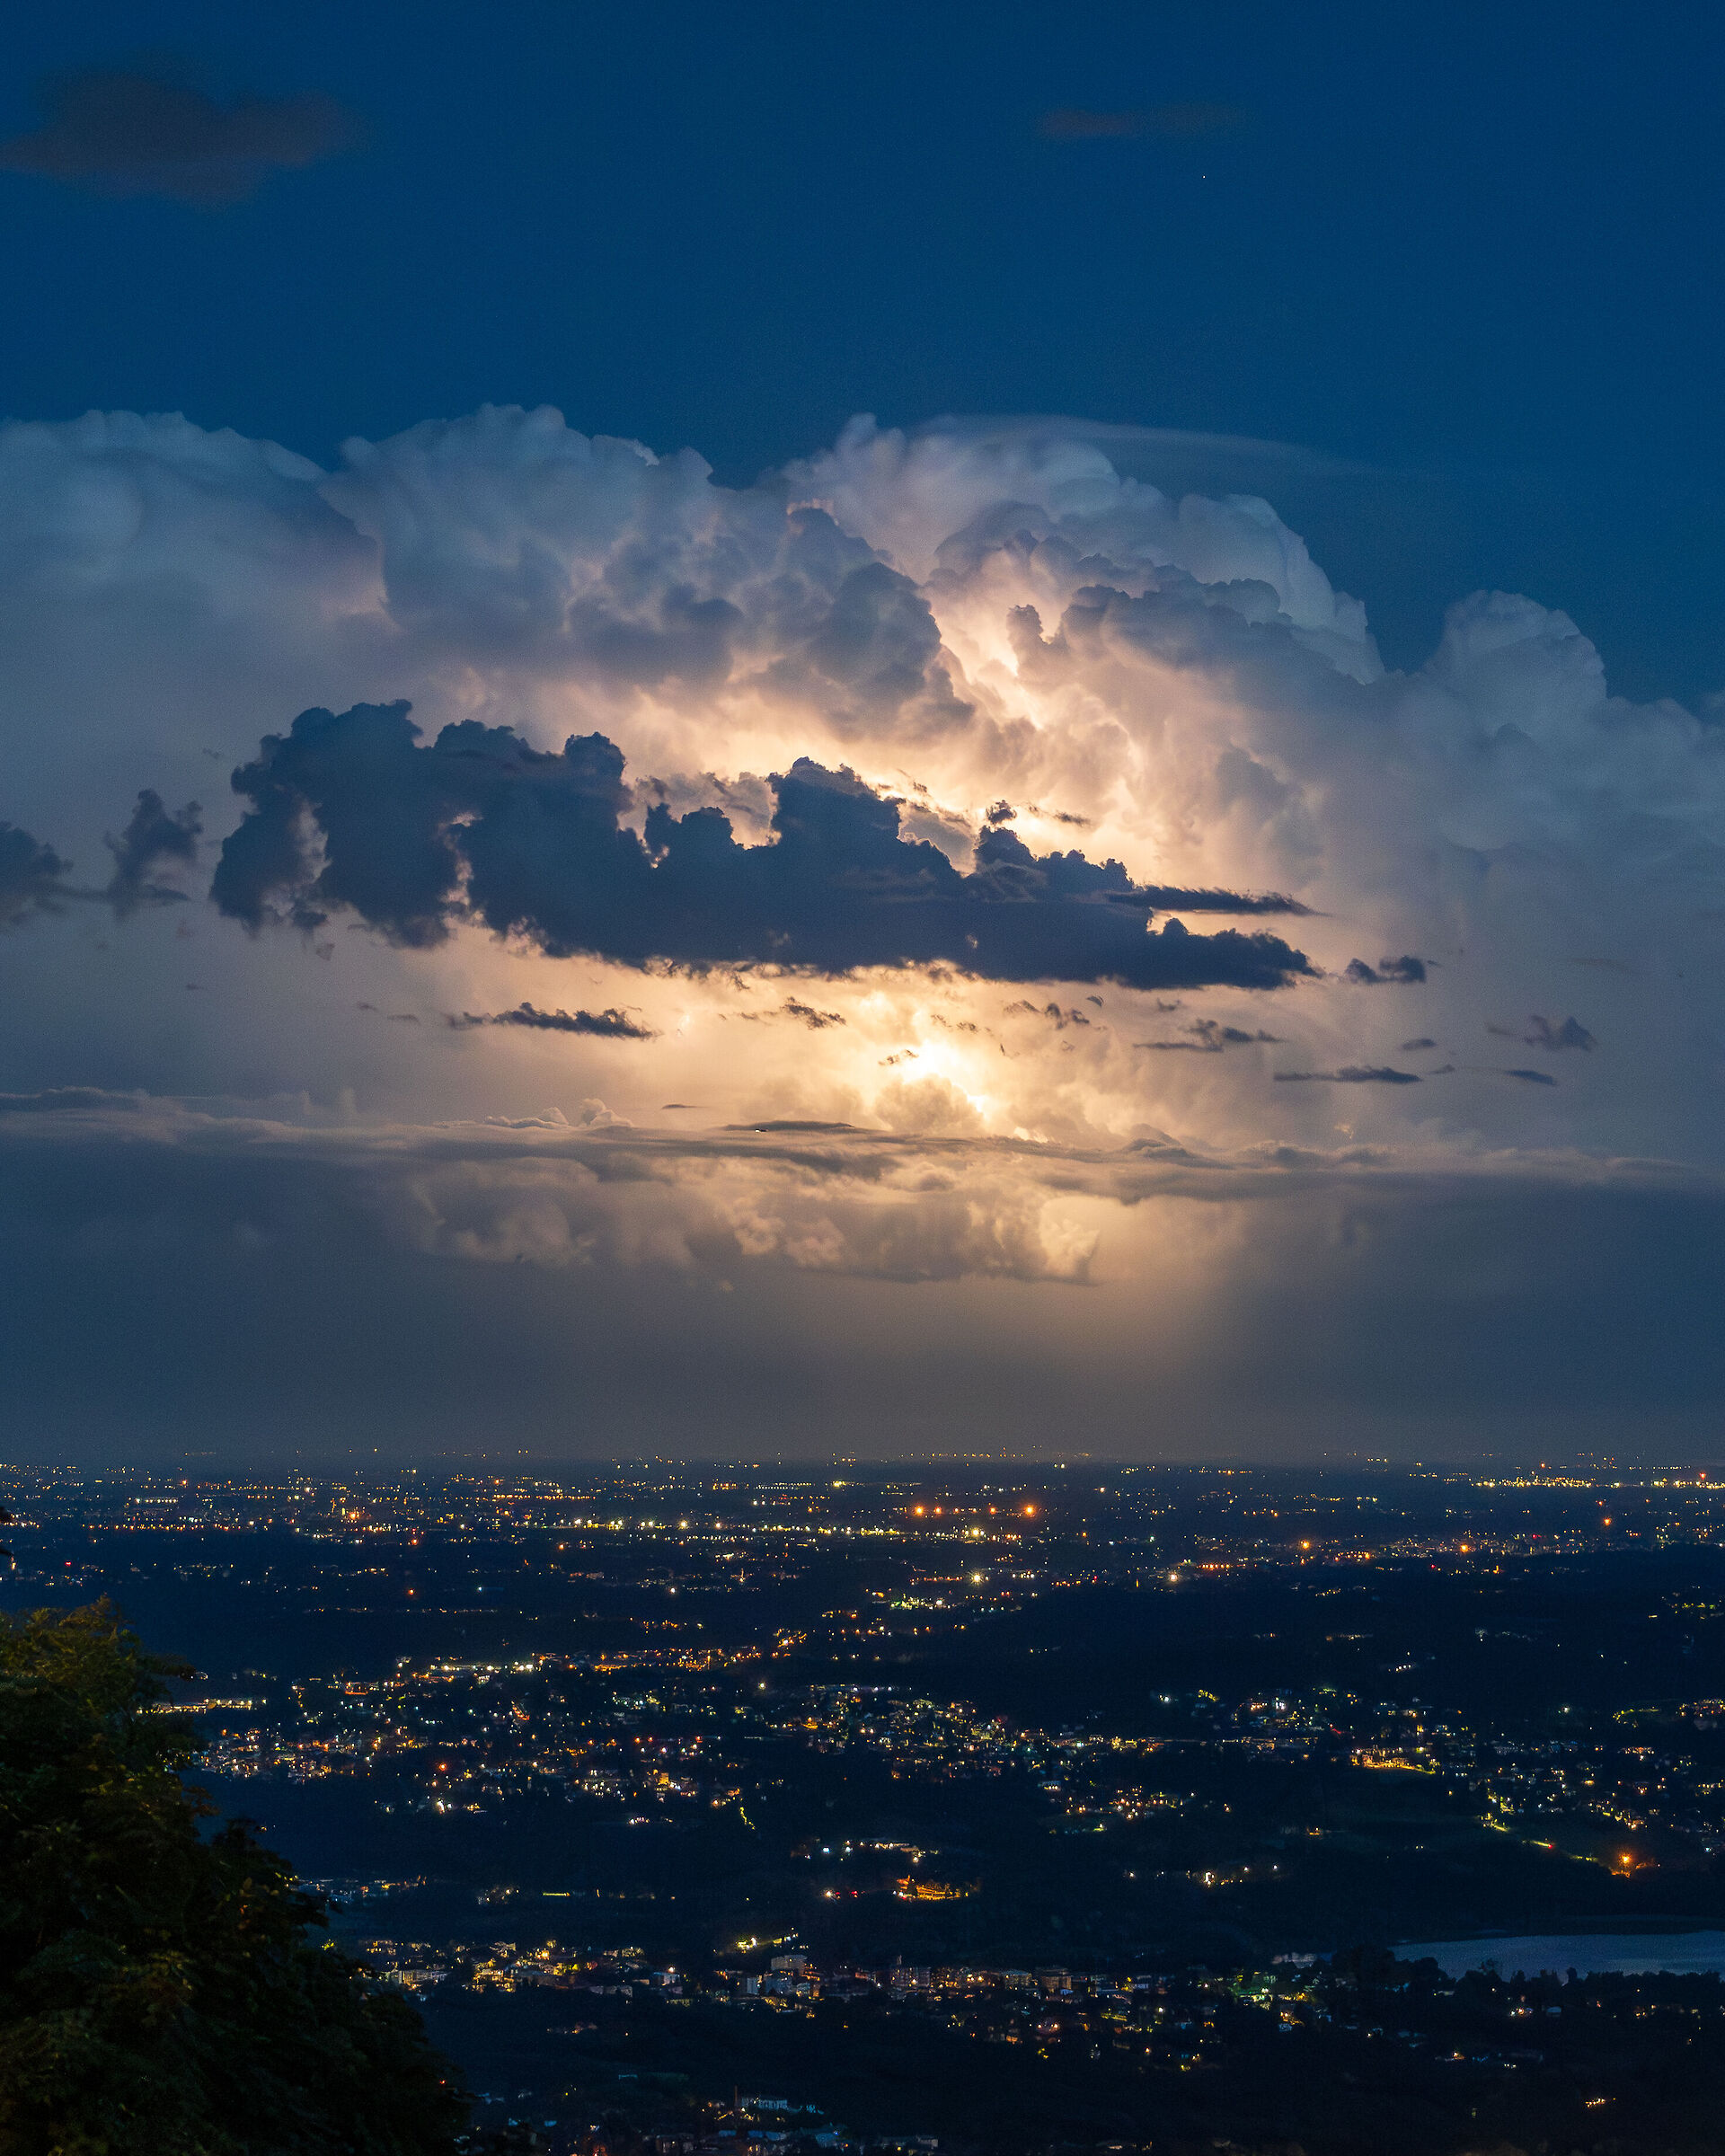 Thunderstorm in the plains, from the Sacro Monte of Varese...